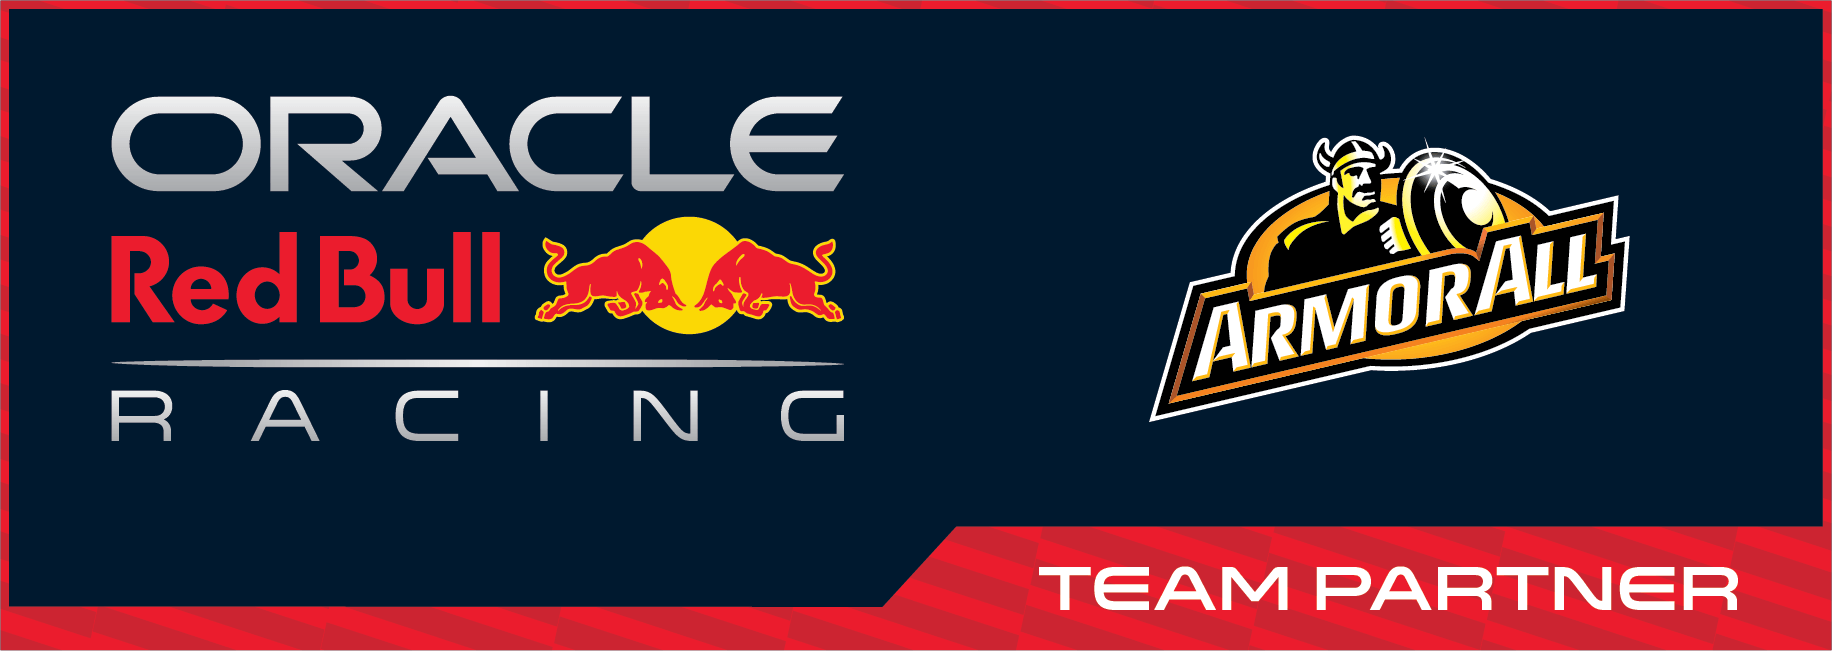 Dronning Med andre band skrubbe Oracle Red Bull Racing | Armor All US